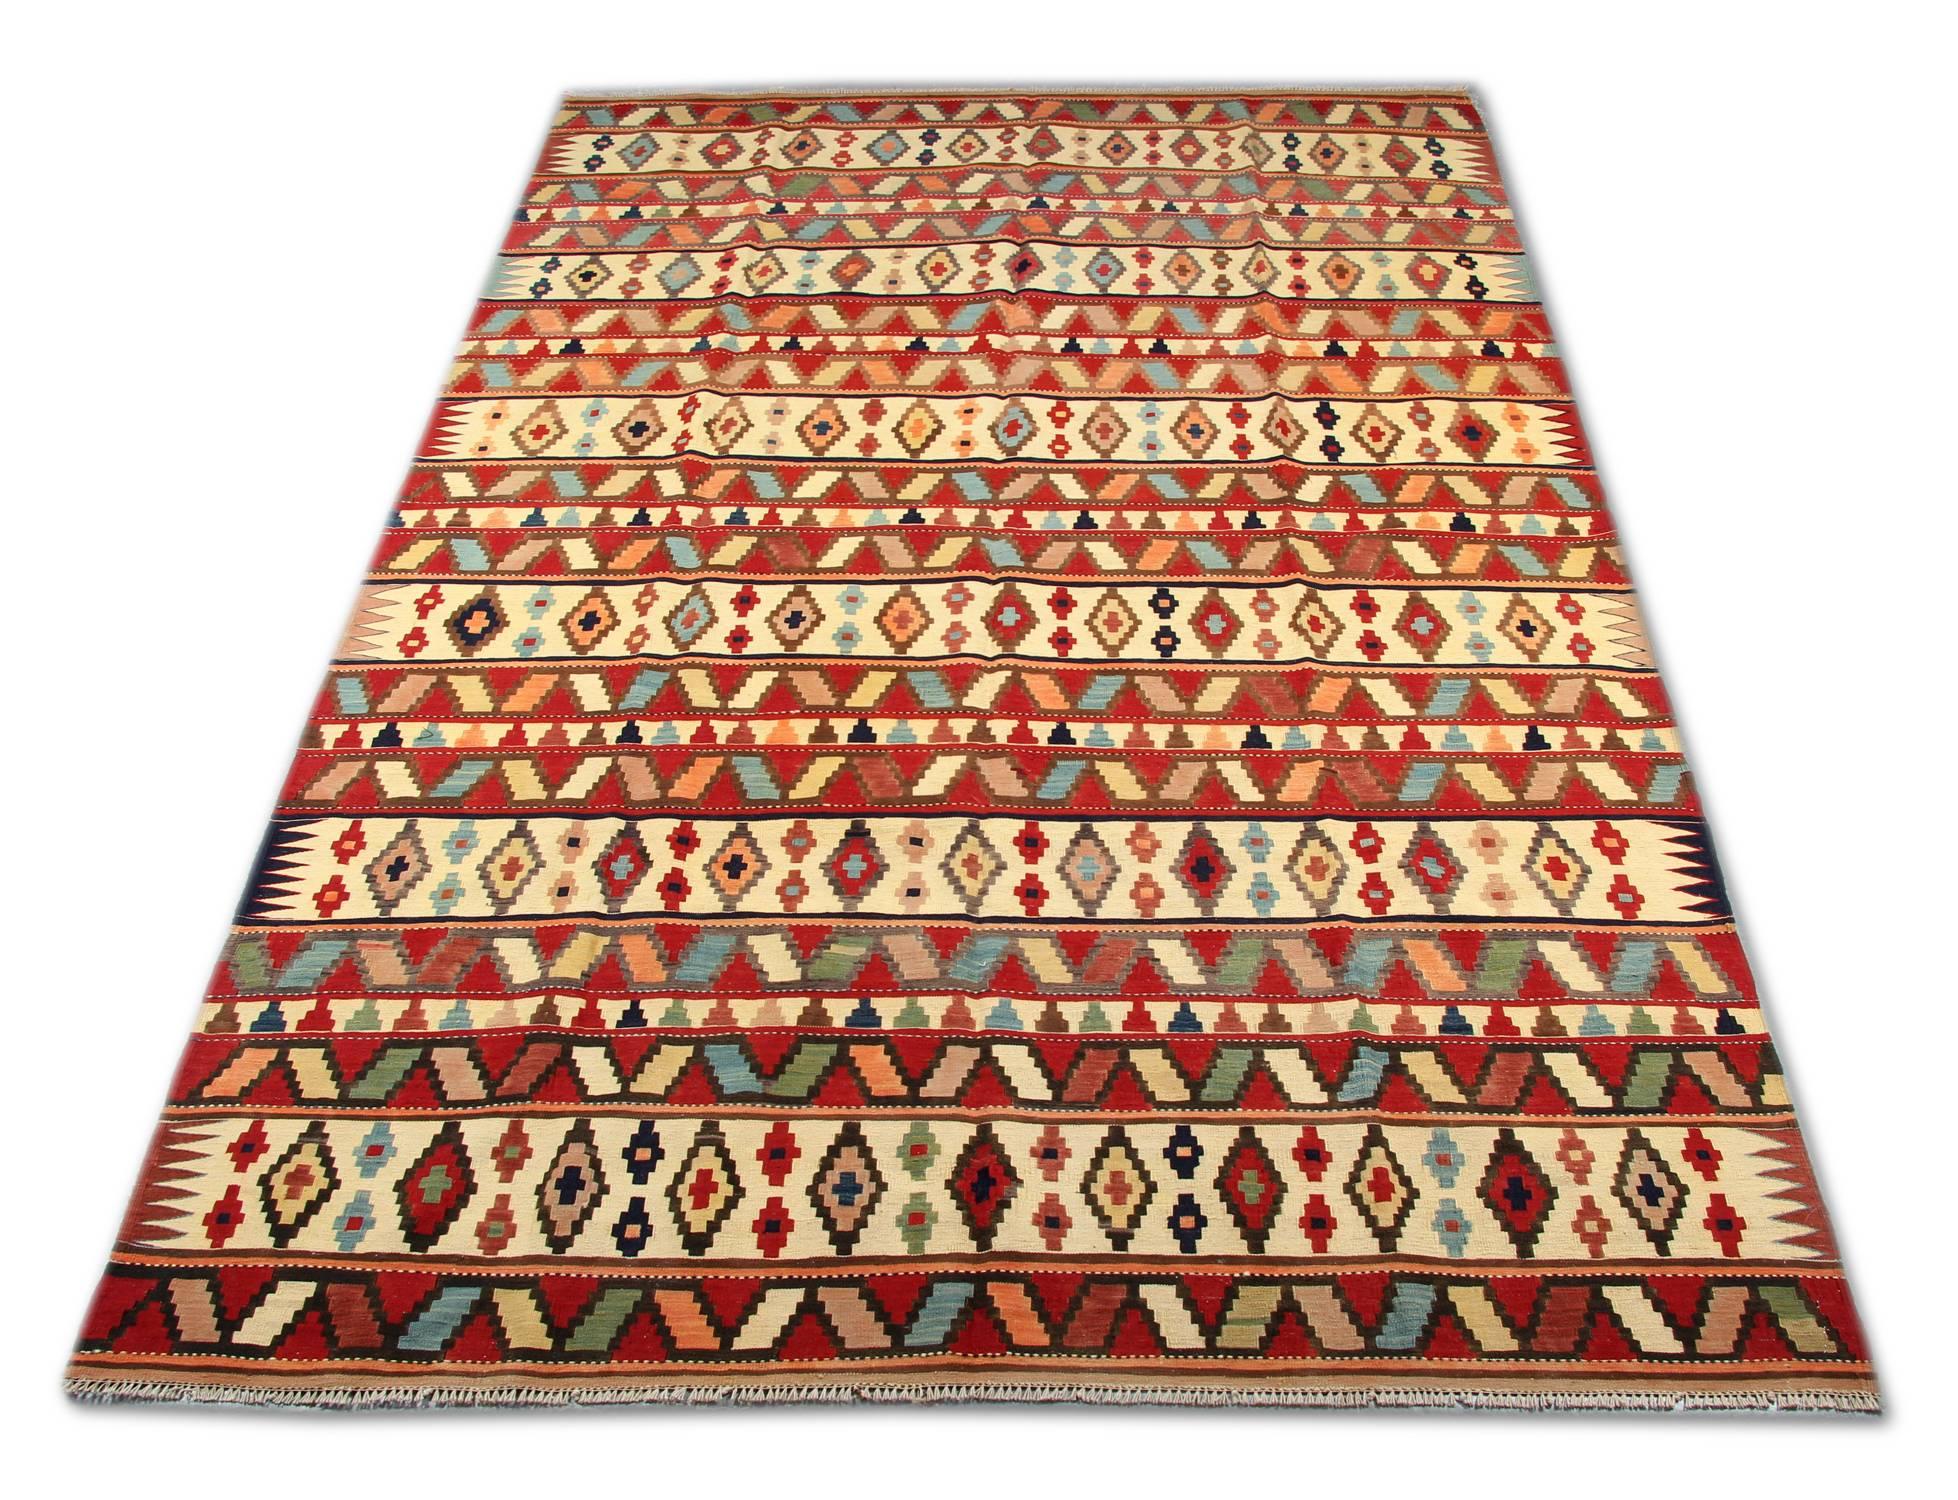 This handmade carpet colorful Caucasian carpet Oriental rug is woven by very skilled weavers in Azerbaijan, who used the highest quality wool and cotton. The flat-weave rug has ivory, orange Salmon, green, white, pink, black and brown colors. The